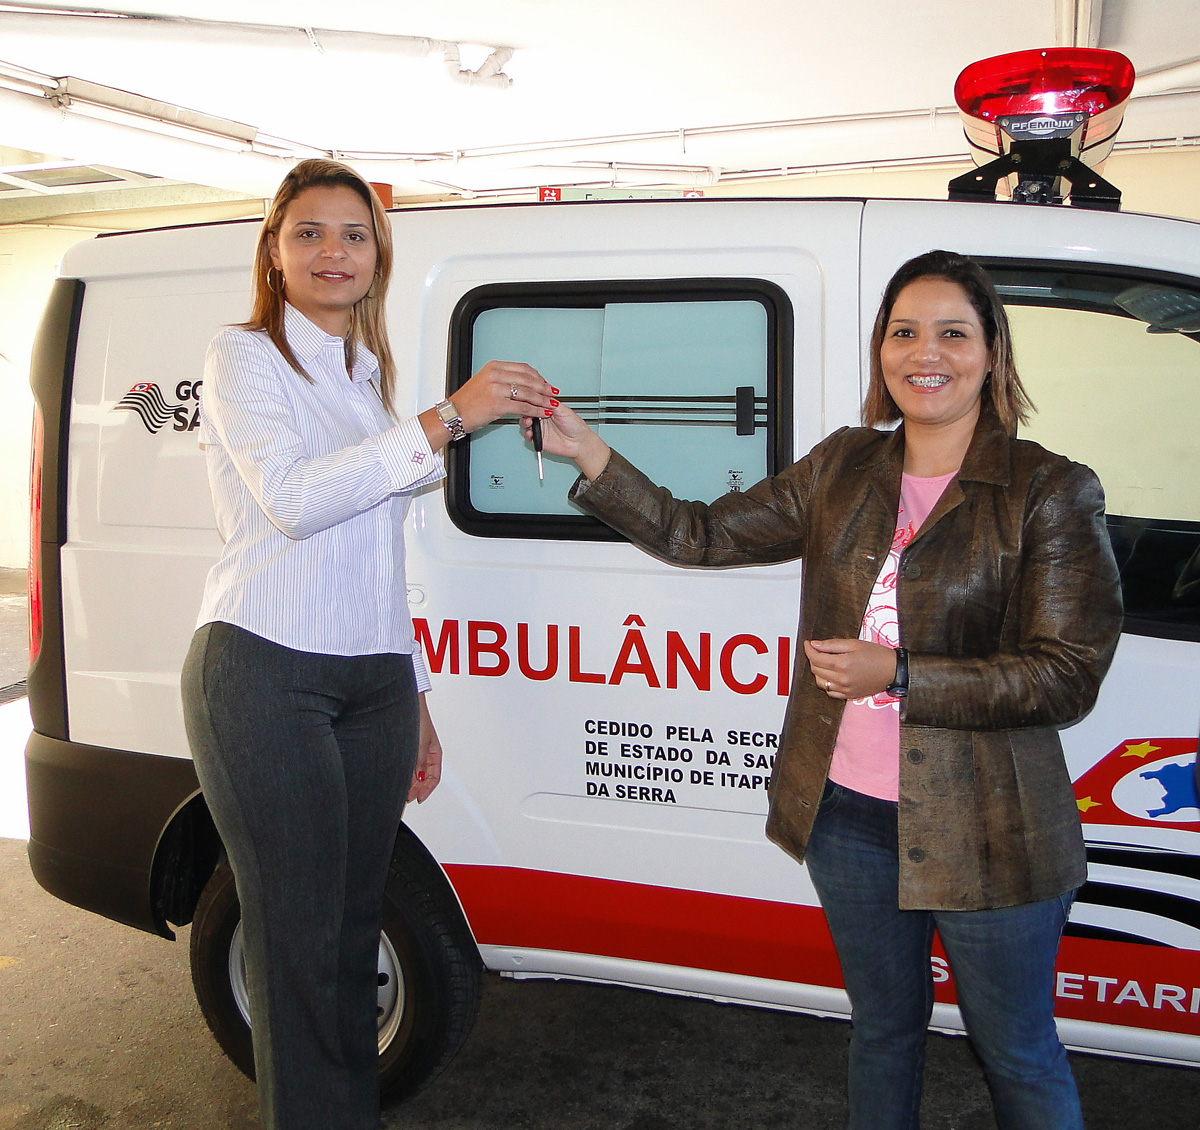 Michelle Sales recebe de Patrcia Lima as chaves da ambulncia<a style='float:right;color:#ccc' href='https://www3.al.sp.gov.br/repositorio/noticia/06-2010/PATRICIALIMAAMBITAPECERICA.jpg' target=_blank><i class='bi bi-zoom-in'></i> Clique para ver a imagem </a>